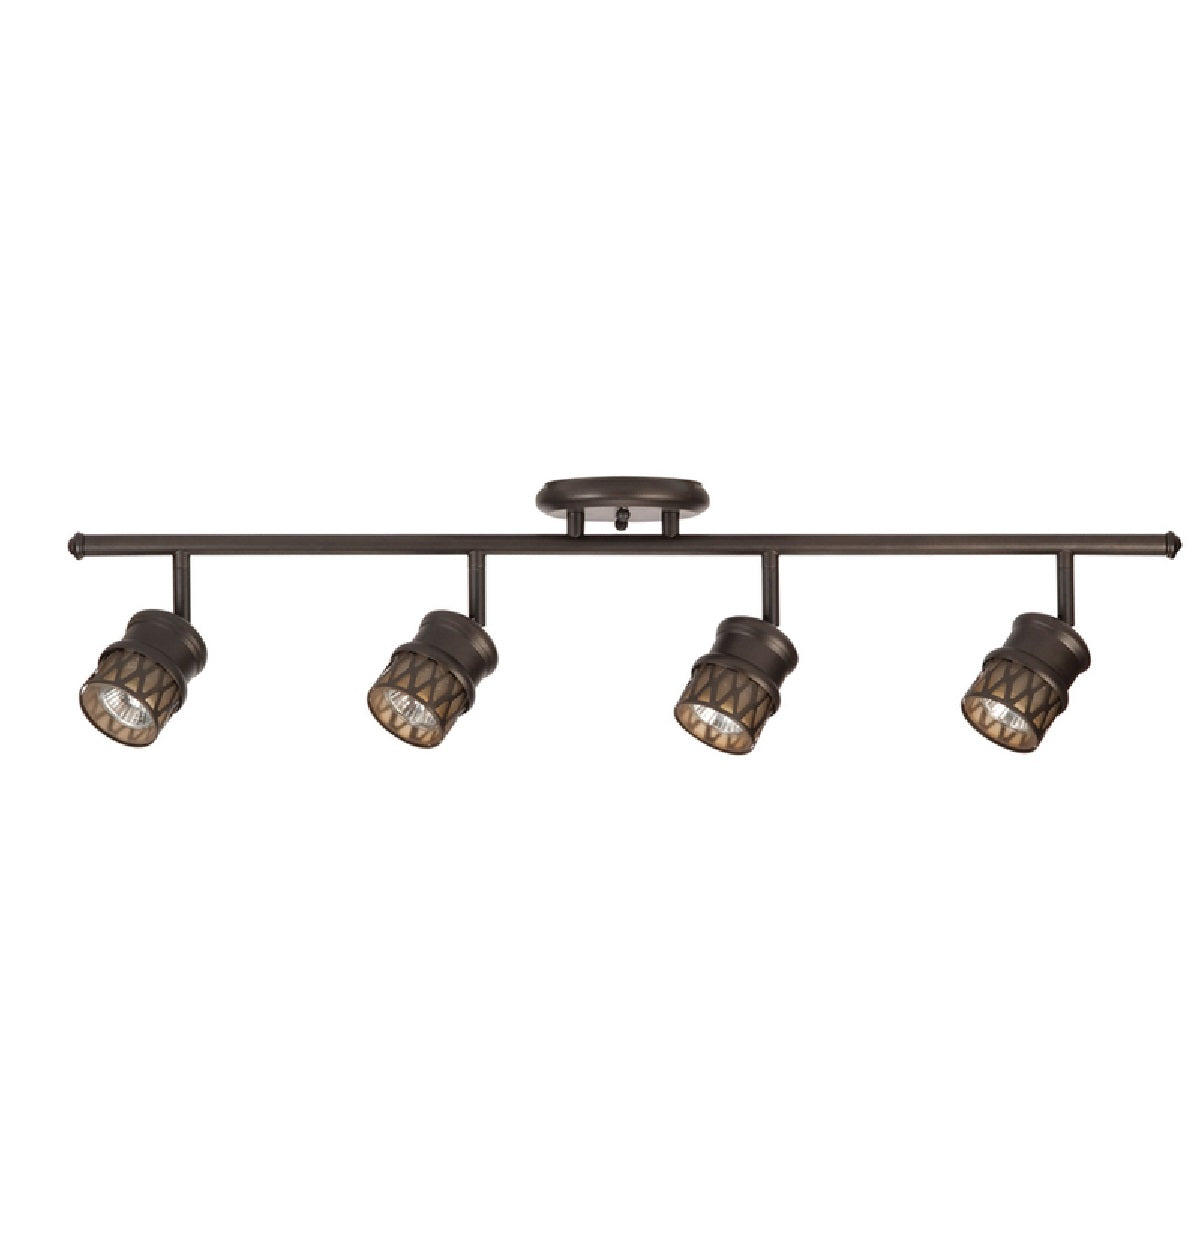 buy track light fixtures at cheap rate in bulk. wholesale & retail lamp supplies store. home décor ideas, maintenance, repair replacement parts